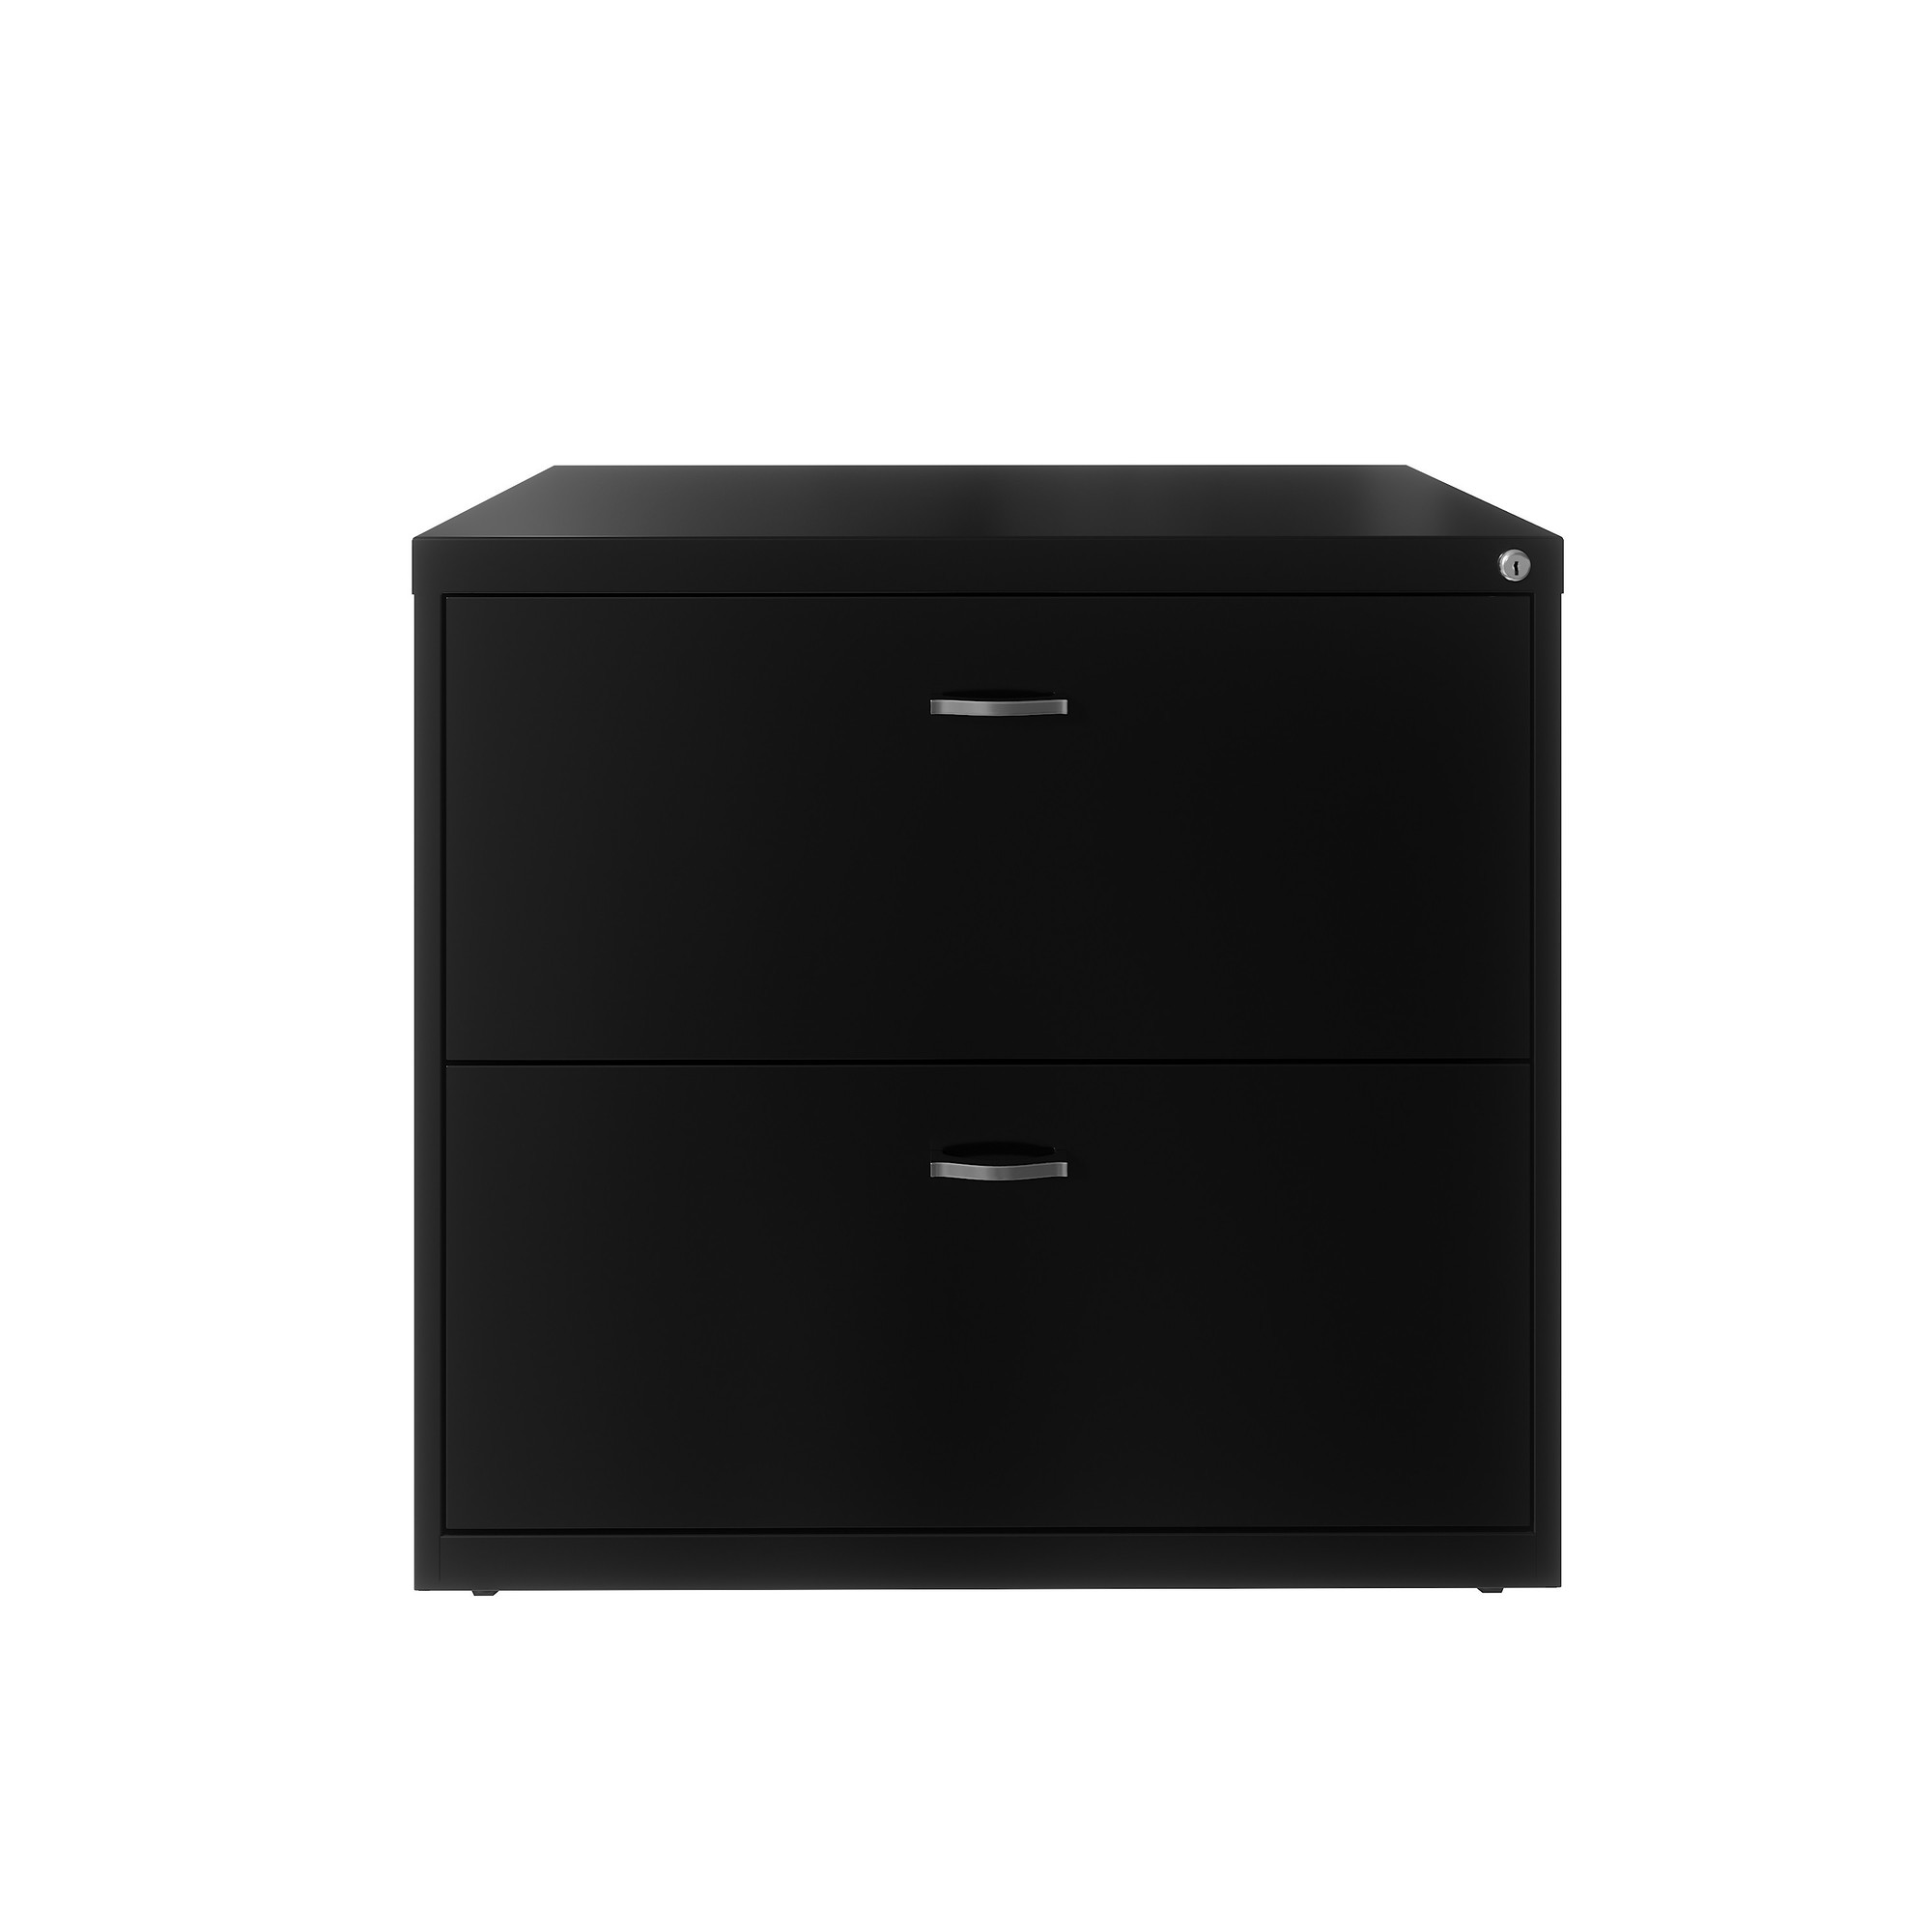 Hirsh Industries, 2 Drawer Lateral File Cabinet, Width 30 in, Depth 17.63 in, Height 27.75 in, Model 23923